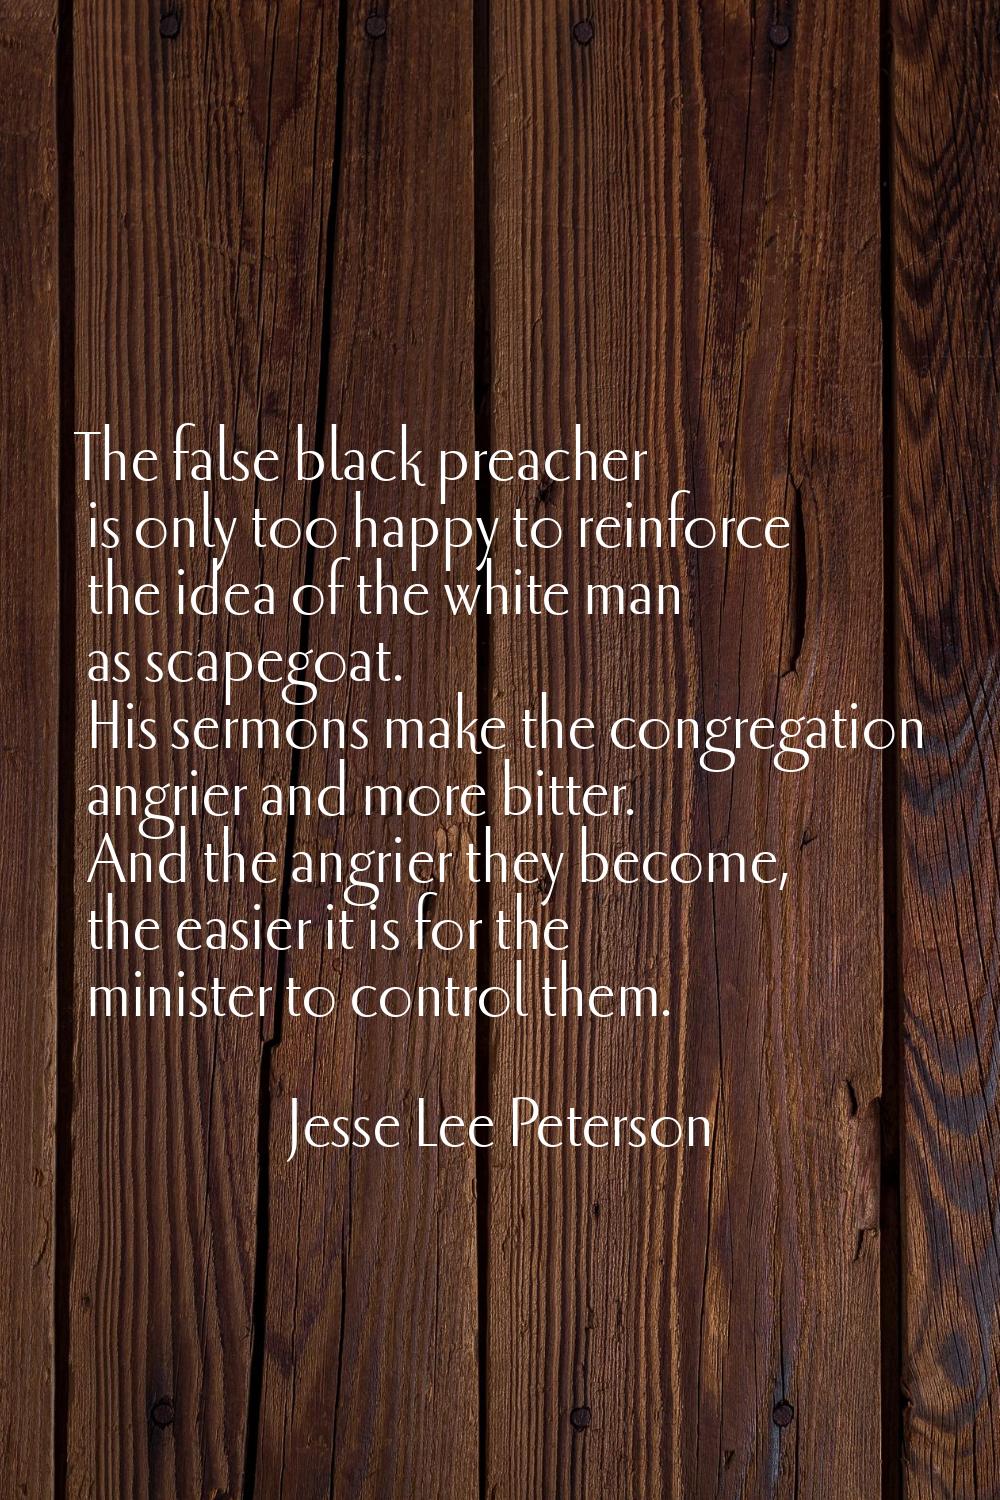 The false black preacher is only too happy to reinforce the idea of the white man as scapegoat. His